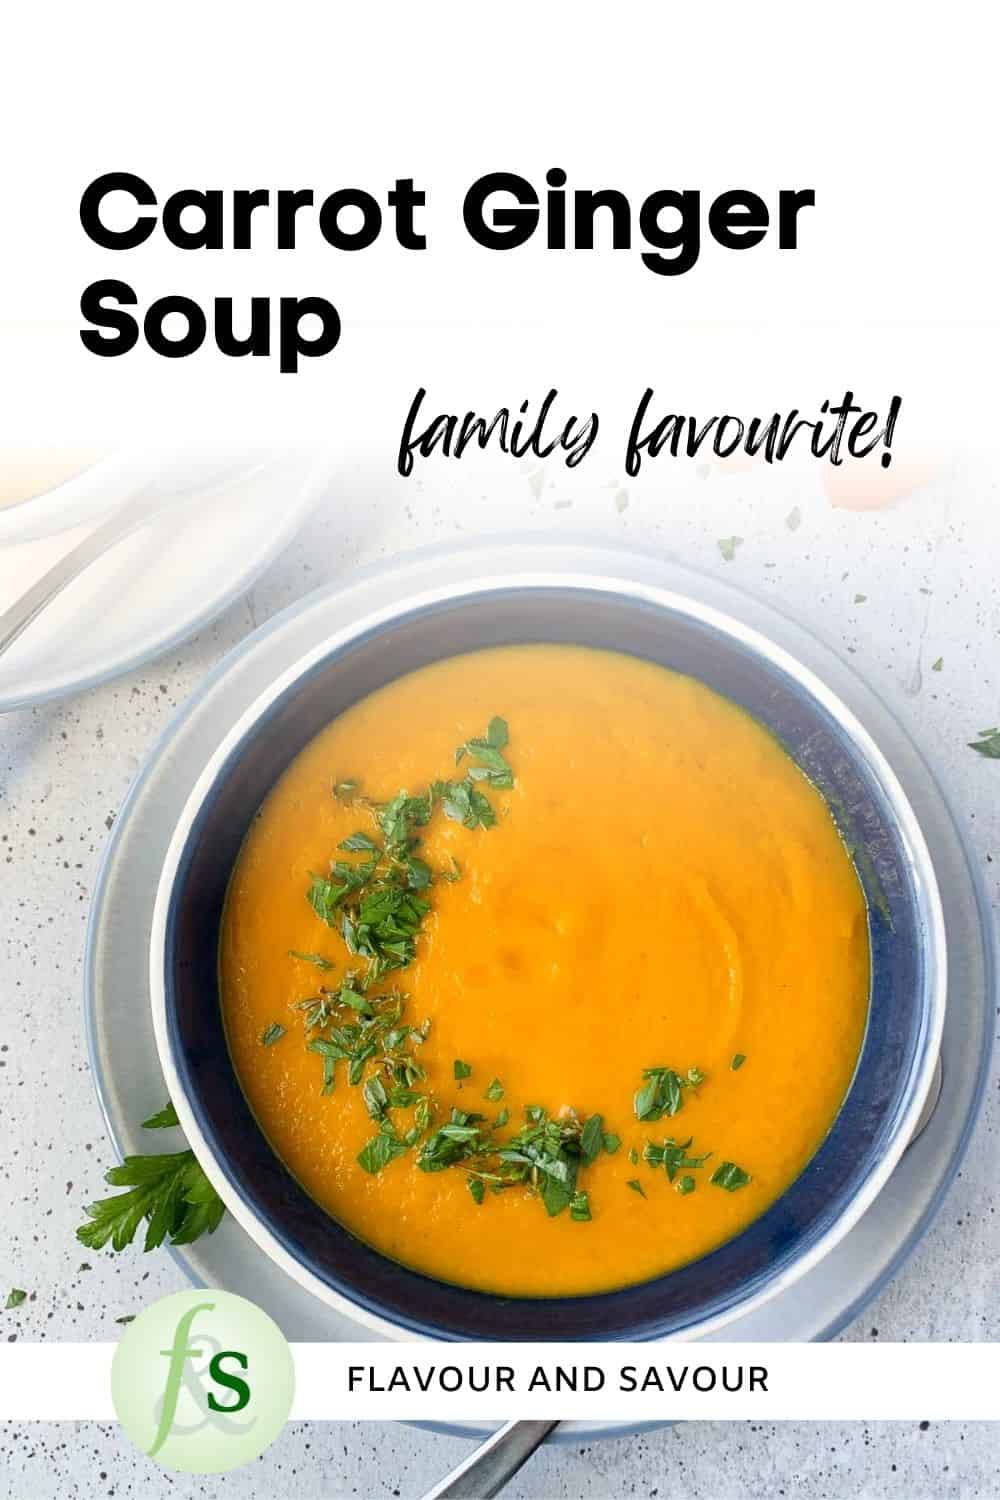 Image with text overlay for family favourite carrot ginger soup.